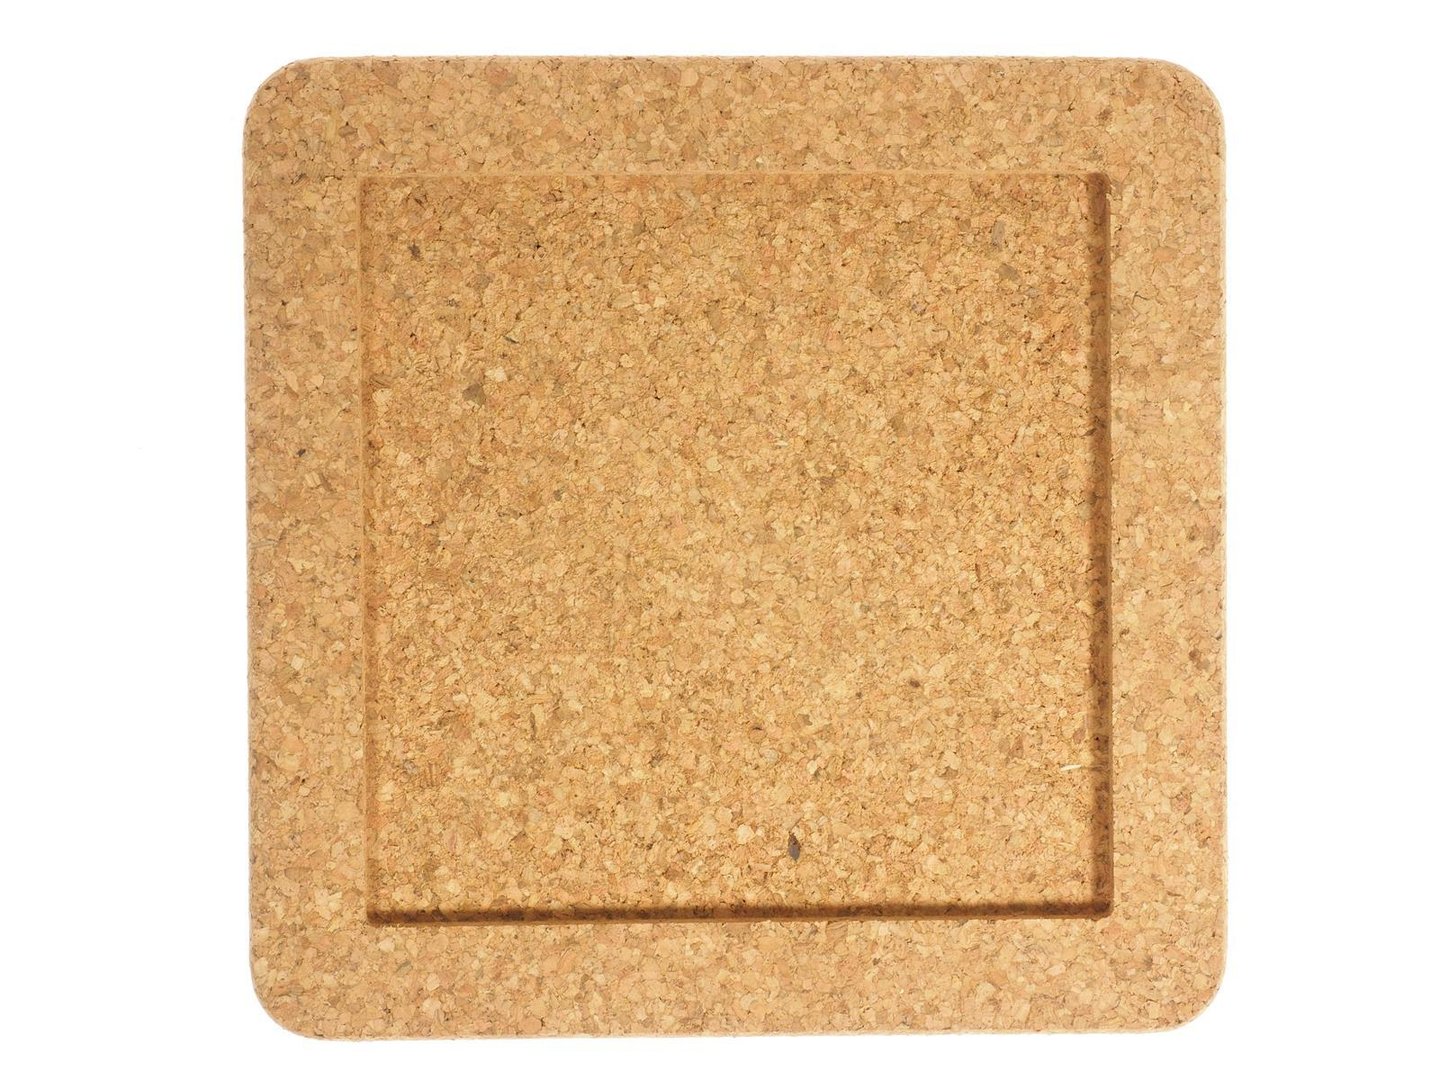 7760 0 Coaster With cut-out Square 1